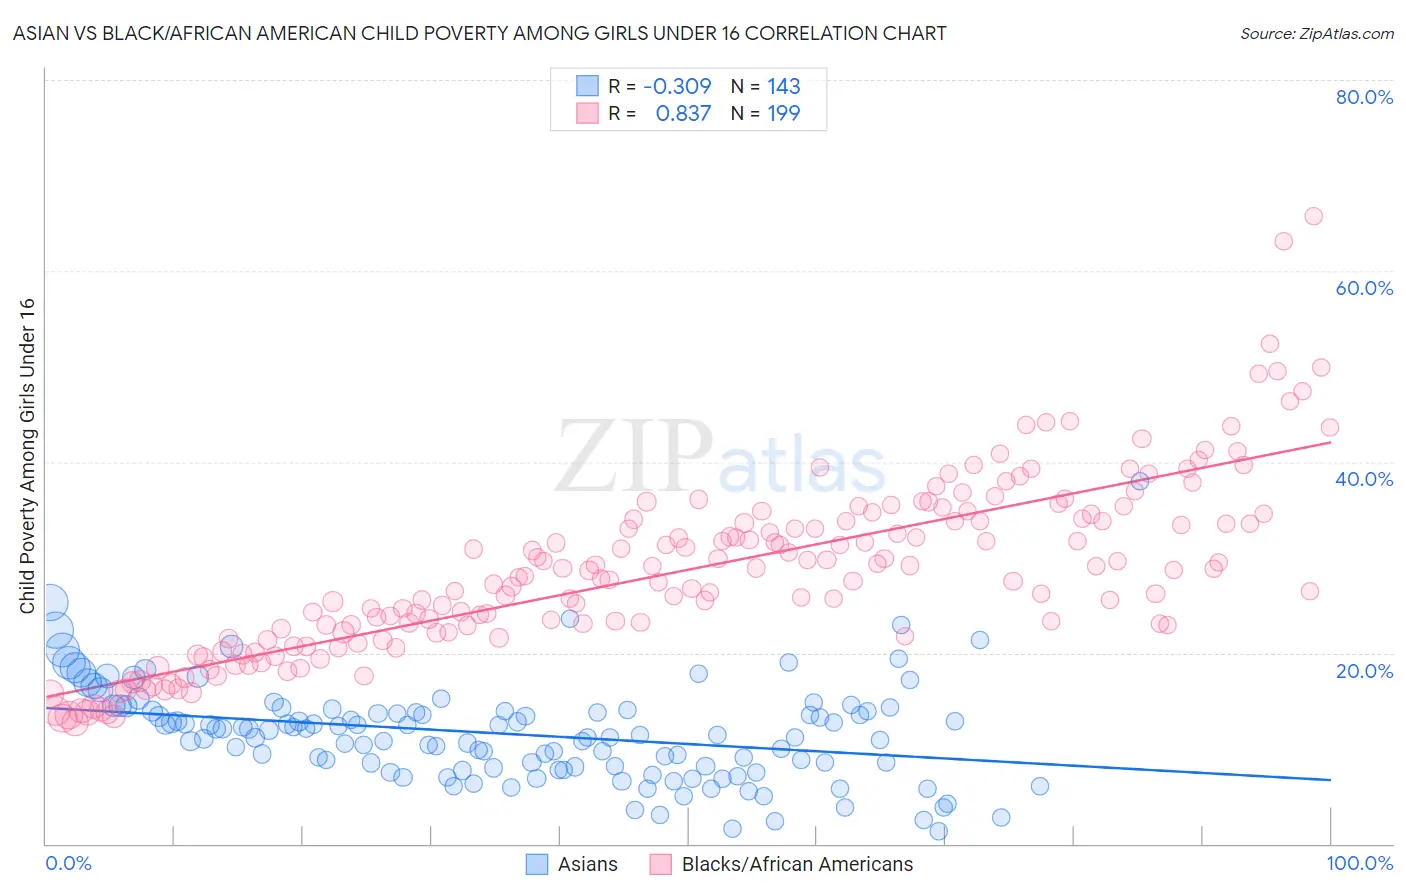 Asian vs Black/African American Child Poverty Among Girls Under 16